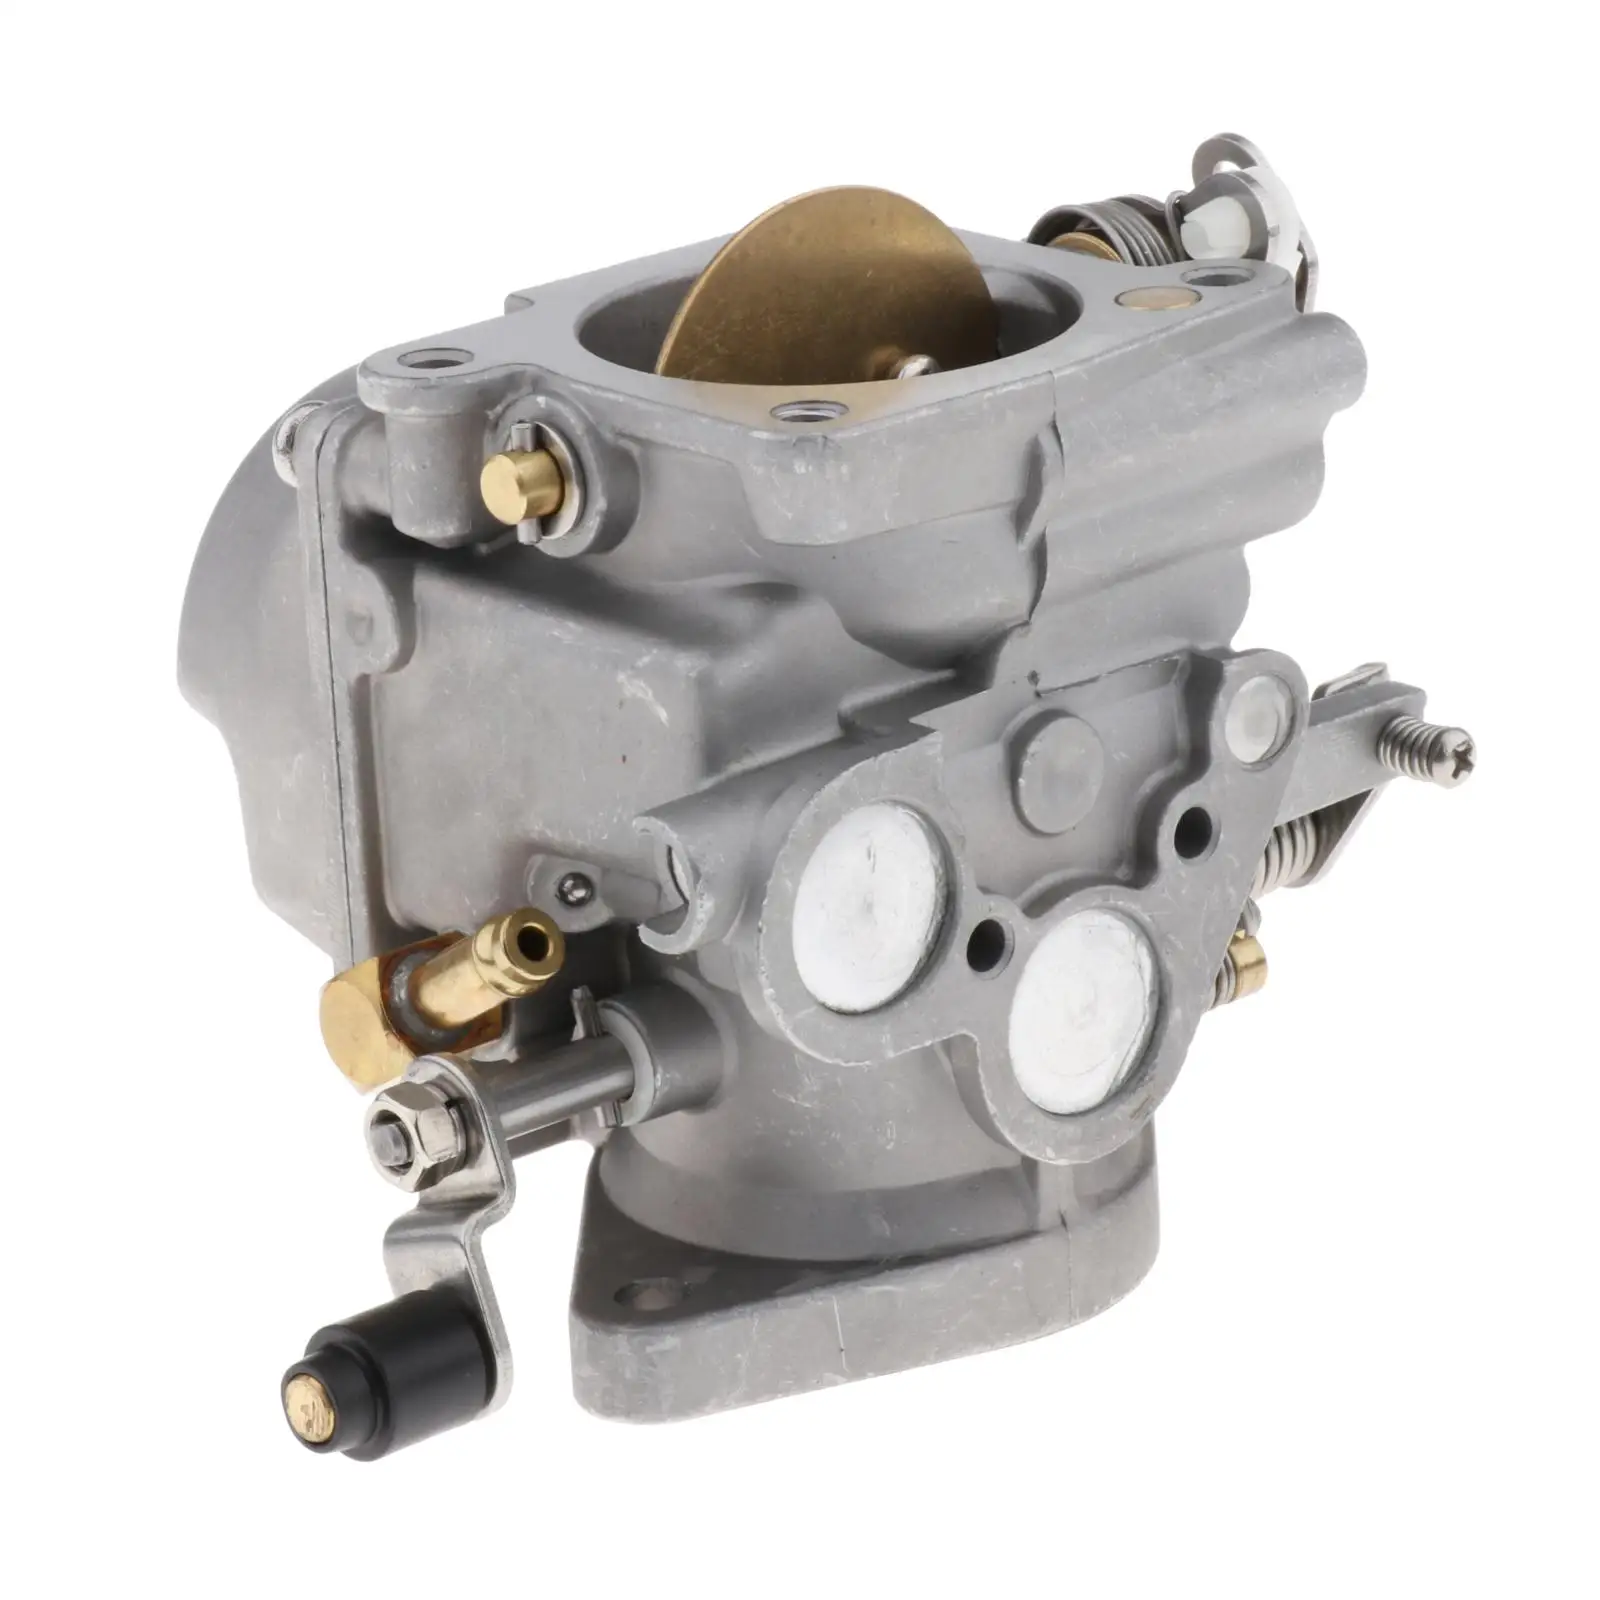 

Carburetor Carb For Tohatsu Nissan 25HP M25C 30HP M30A 2-Stroke 2 Stroke Outboard Engine 3P0032000 346-03200-0 346032000M